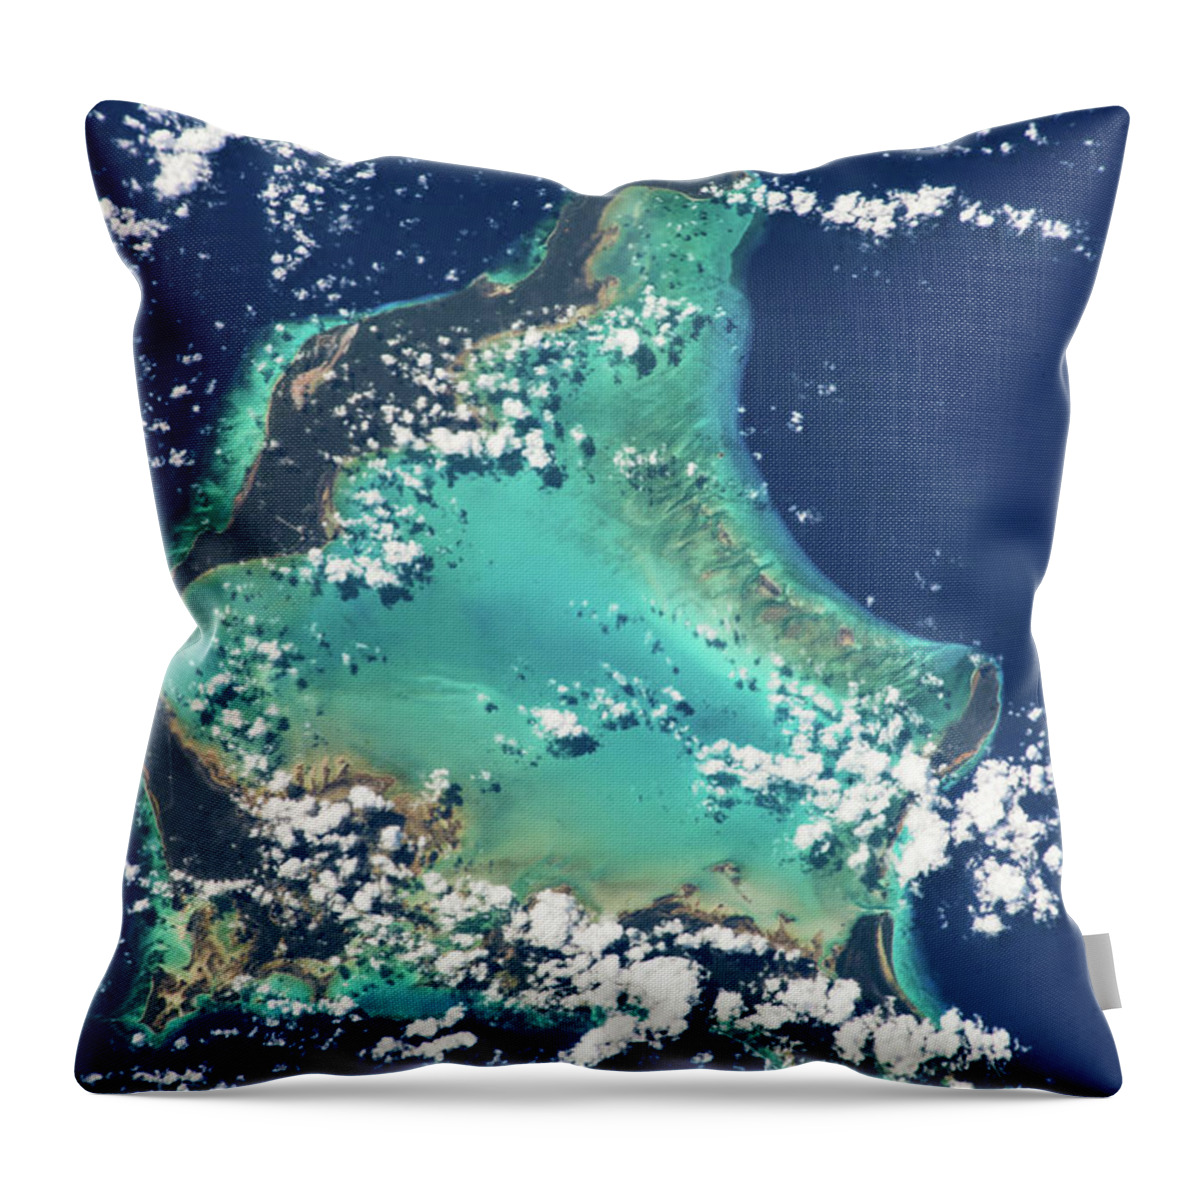 Photography Throw Pillow featuring the photograph Satellite View Of Turks And Caicos by Panoramic Images